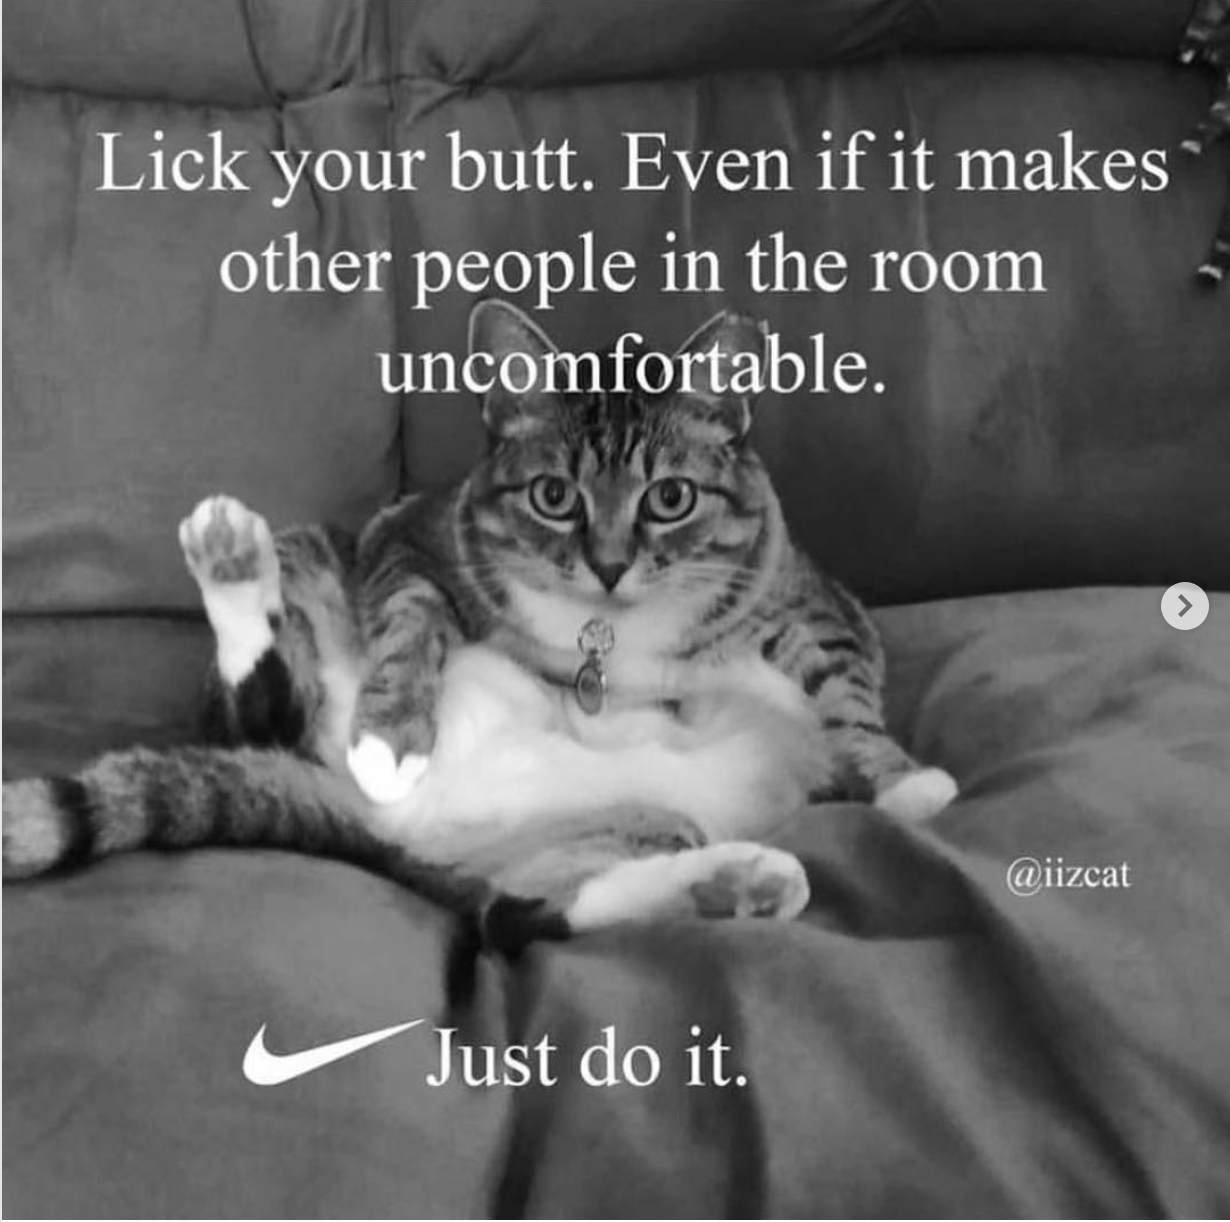 memes  - quotes - Lick your butt. Even if it makes other people in the room uncomfortable. Just do it.